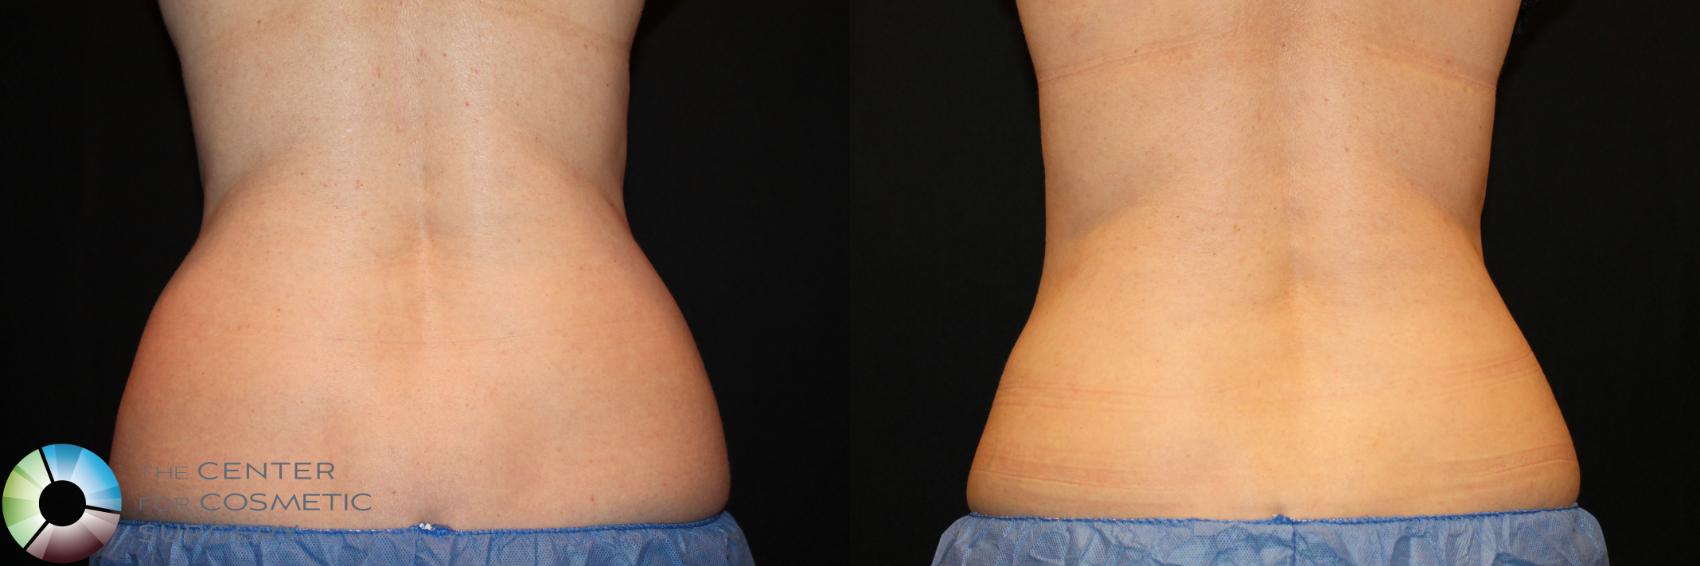 Before & After CoolSculpting Case 737 View #1 in Denver, CO